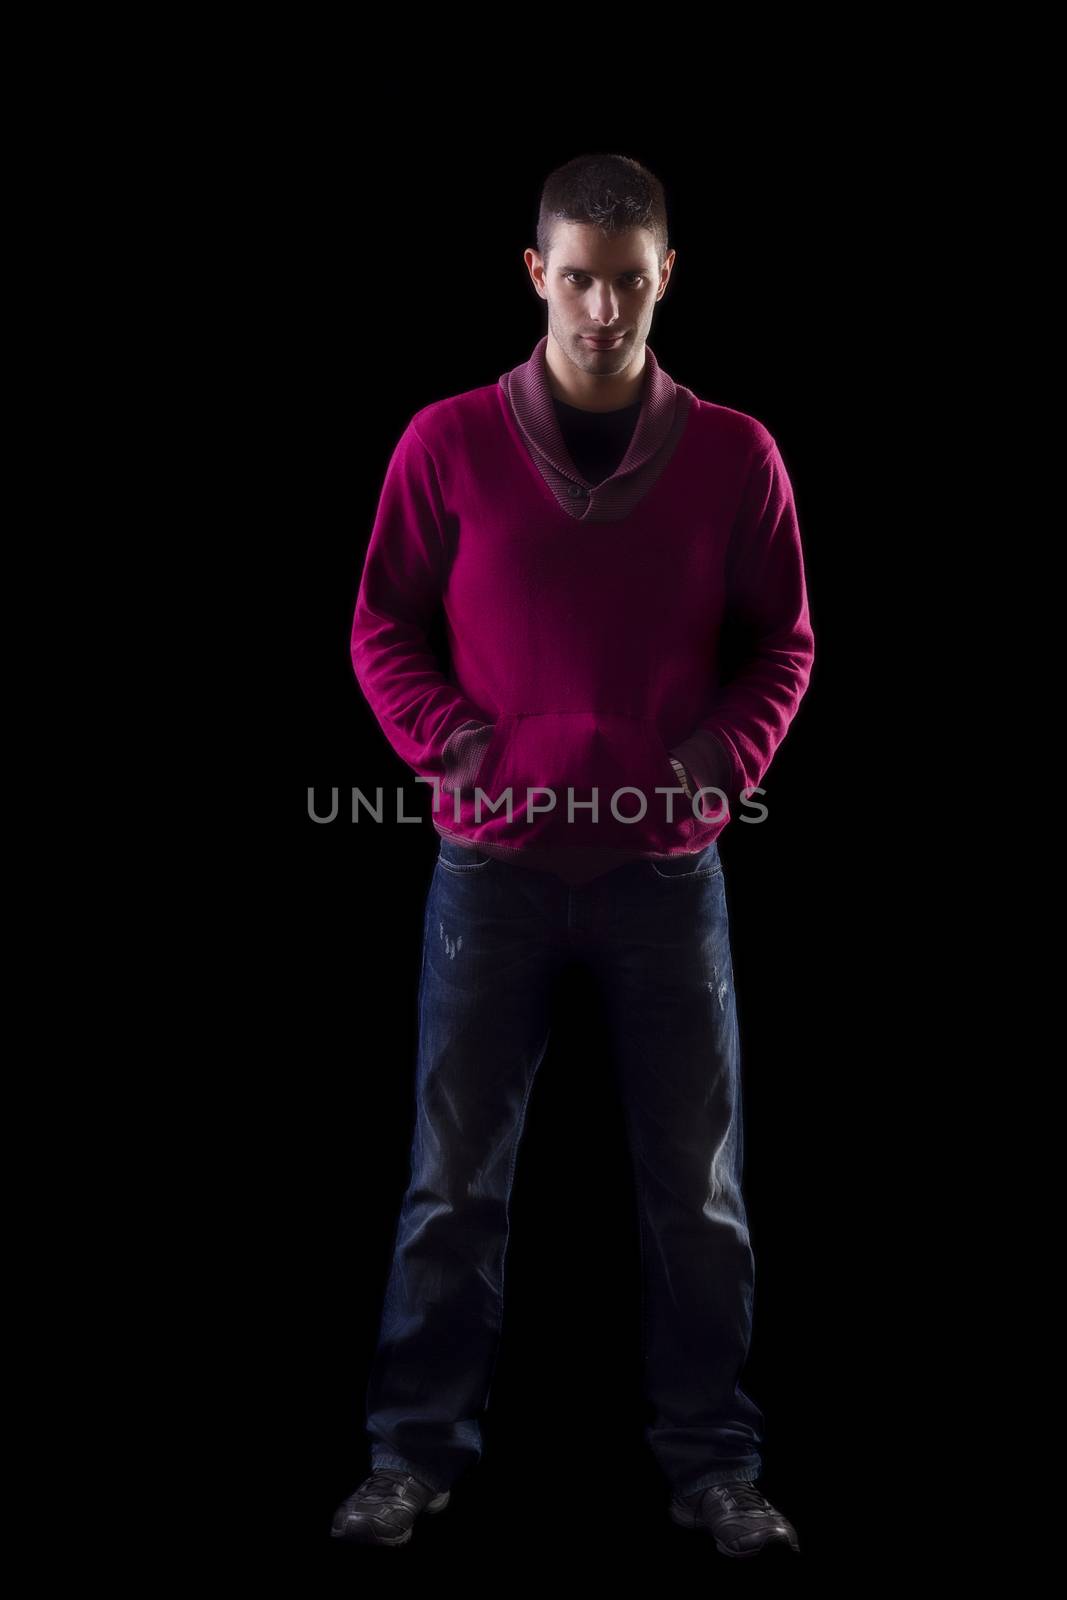 View of a young urban styled fashioned man standing isolated on a black background.